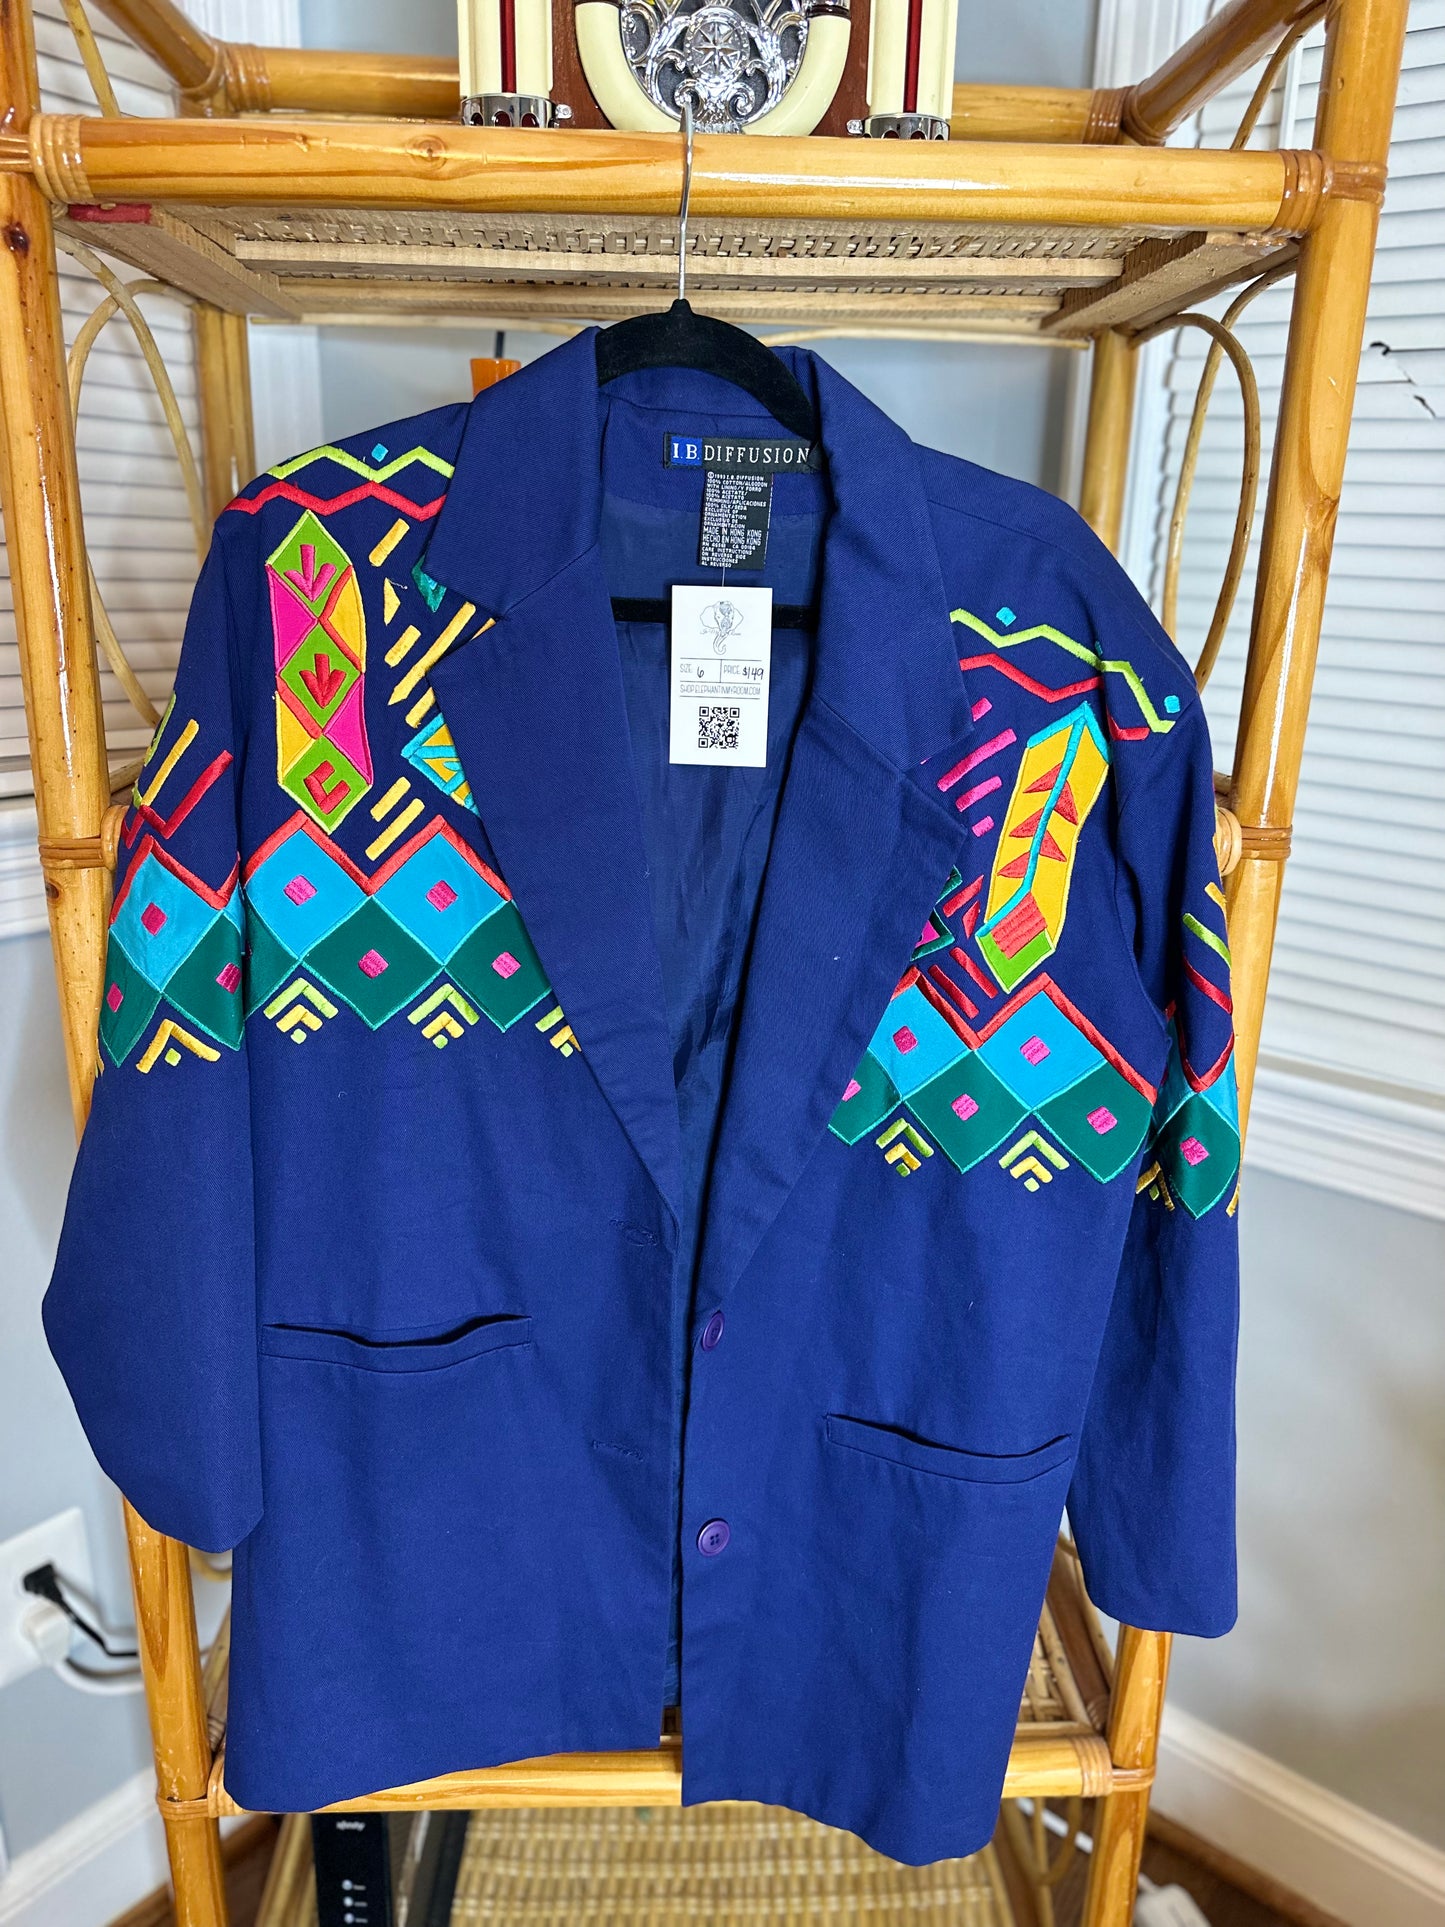 Vintage 1993 I.B. Diffusion Navy Blue Colorful Embroidery Blazer